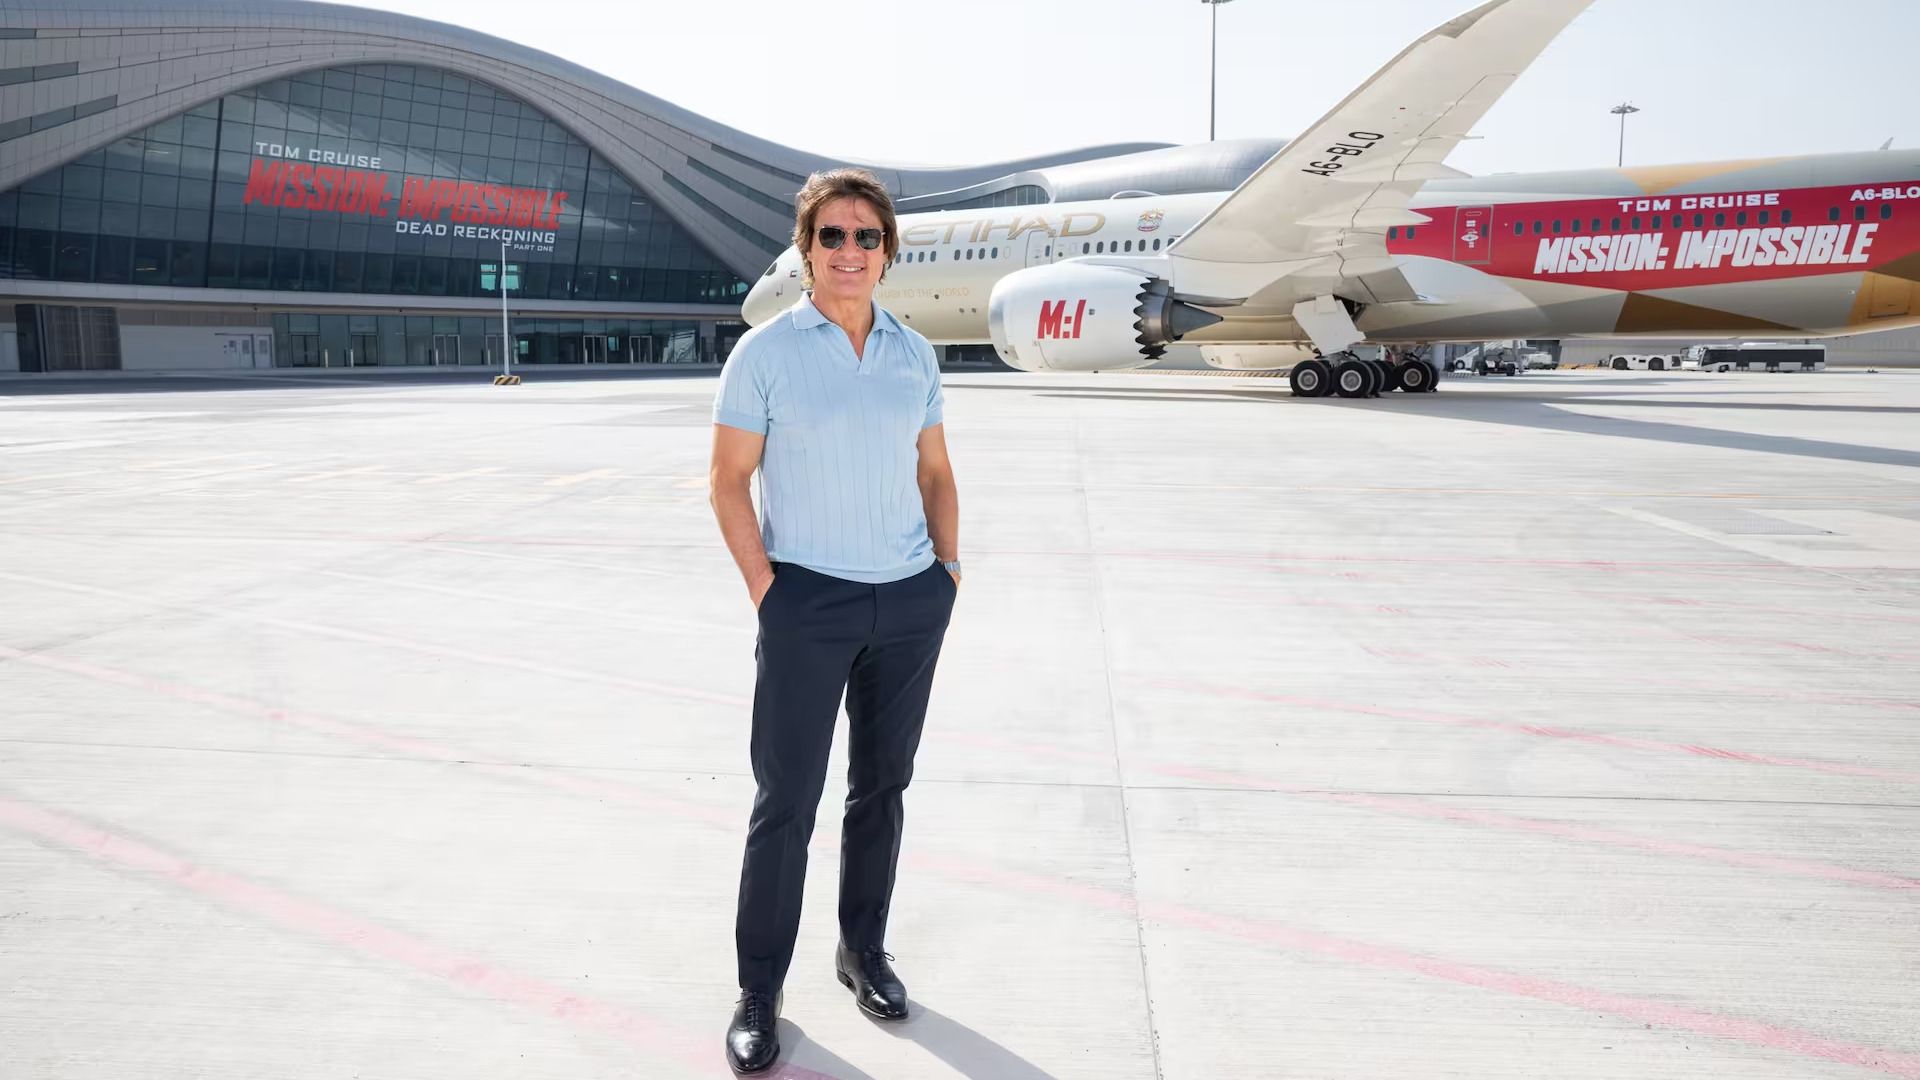 Tom Cruise in front of an Etihad Airways aircraft and Abu Dhabi Airport.